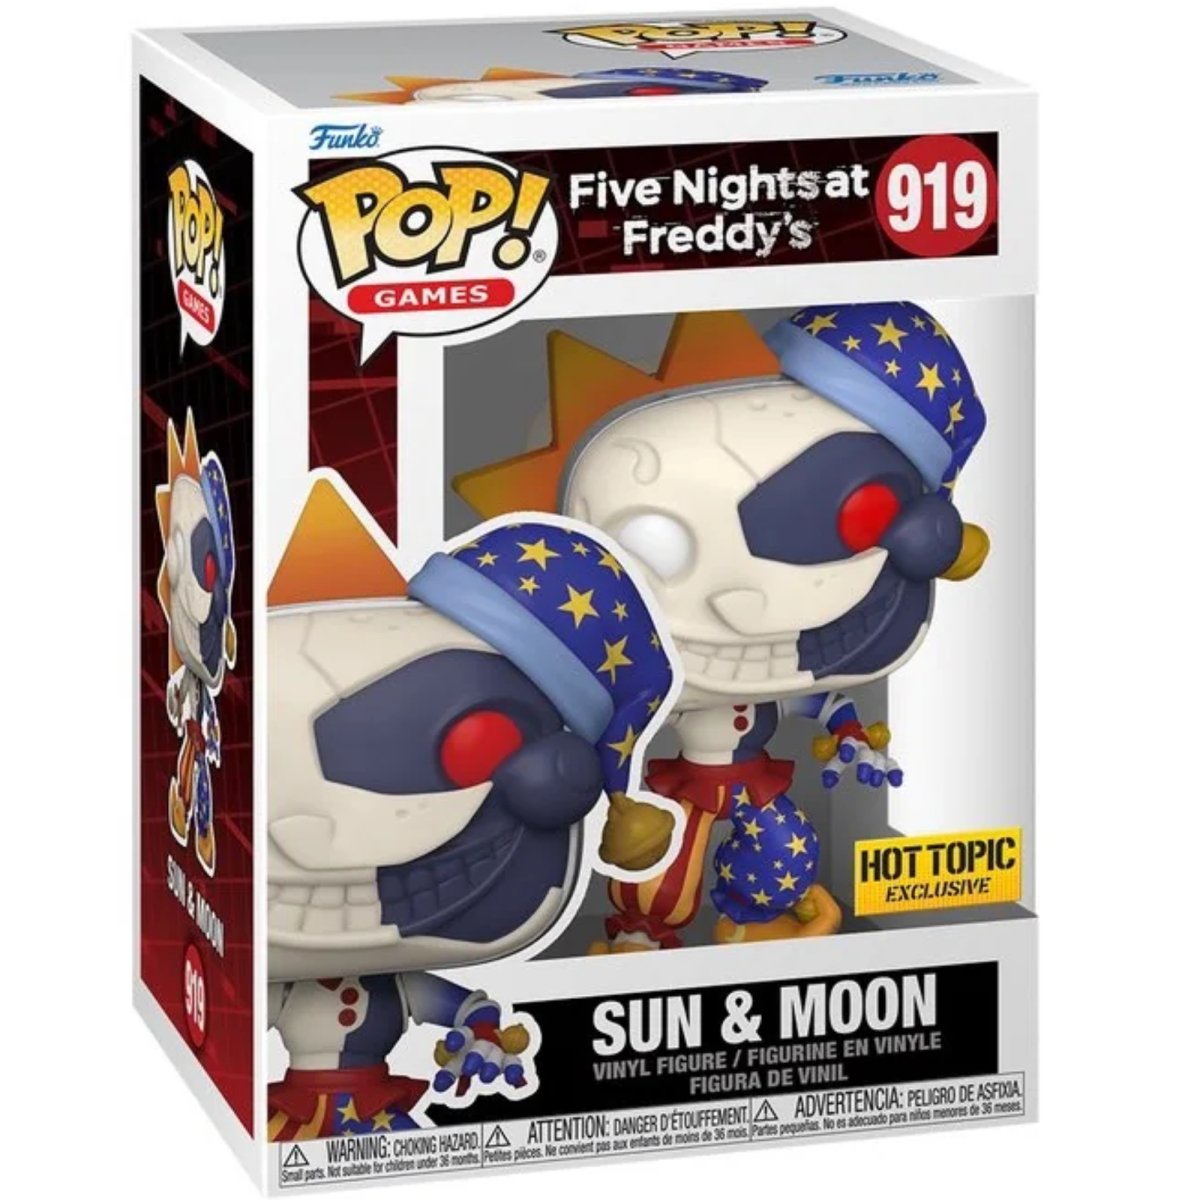 Five Nights at Freddy's - Sun & Moon (Hot Topic Exclusive) #919 - Funko Pop! Vinyl Games - Persona Toys